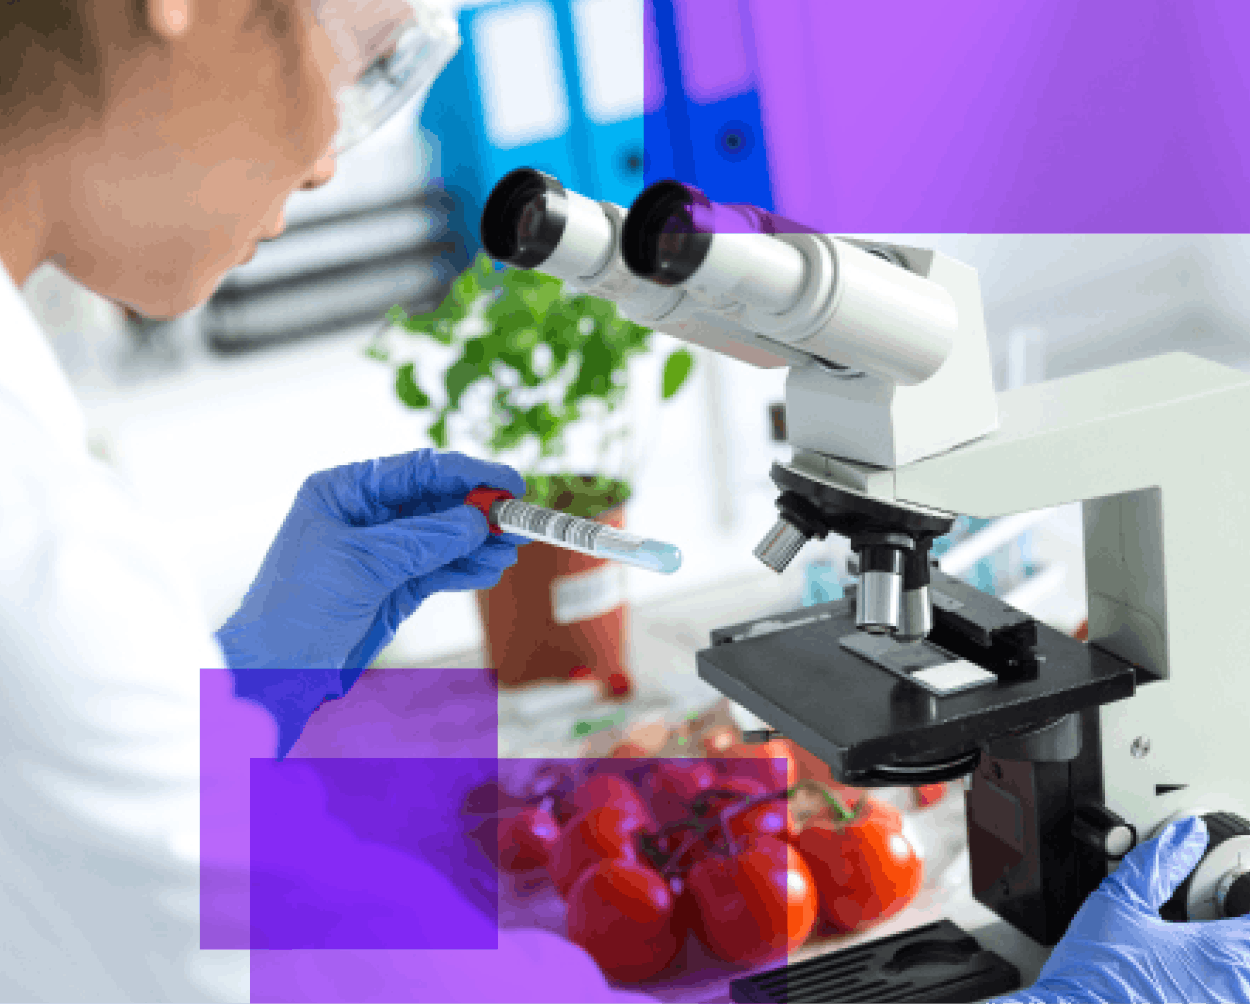 A woman wearing safety glasses leans over a microscope with a plant and tomatoes in the background.